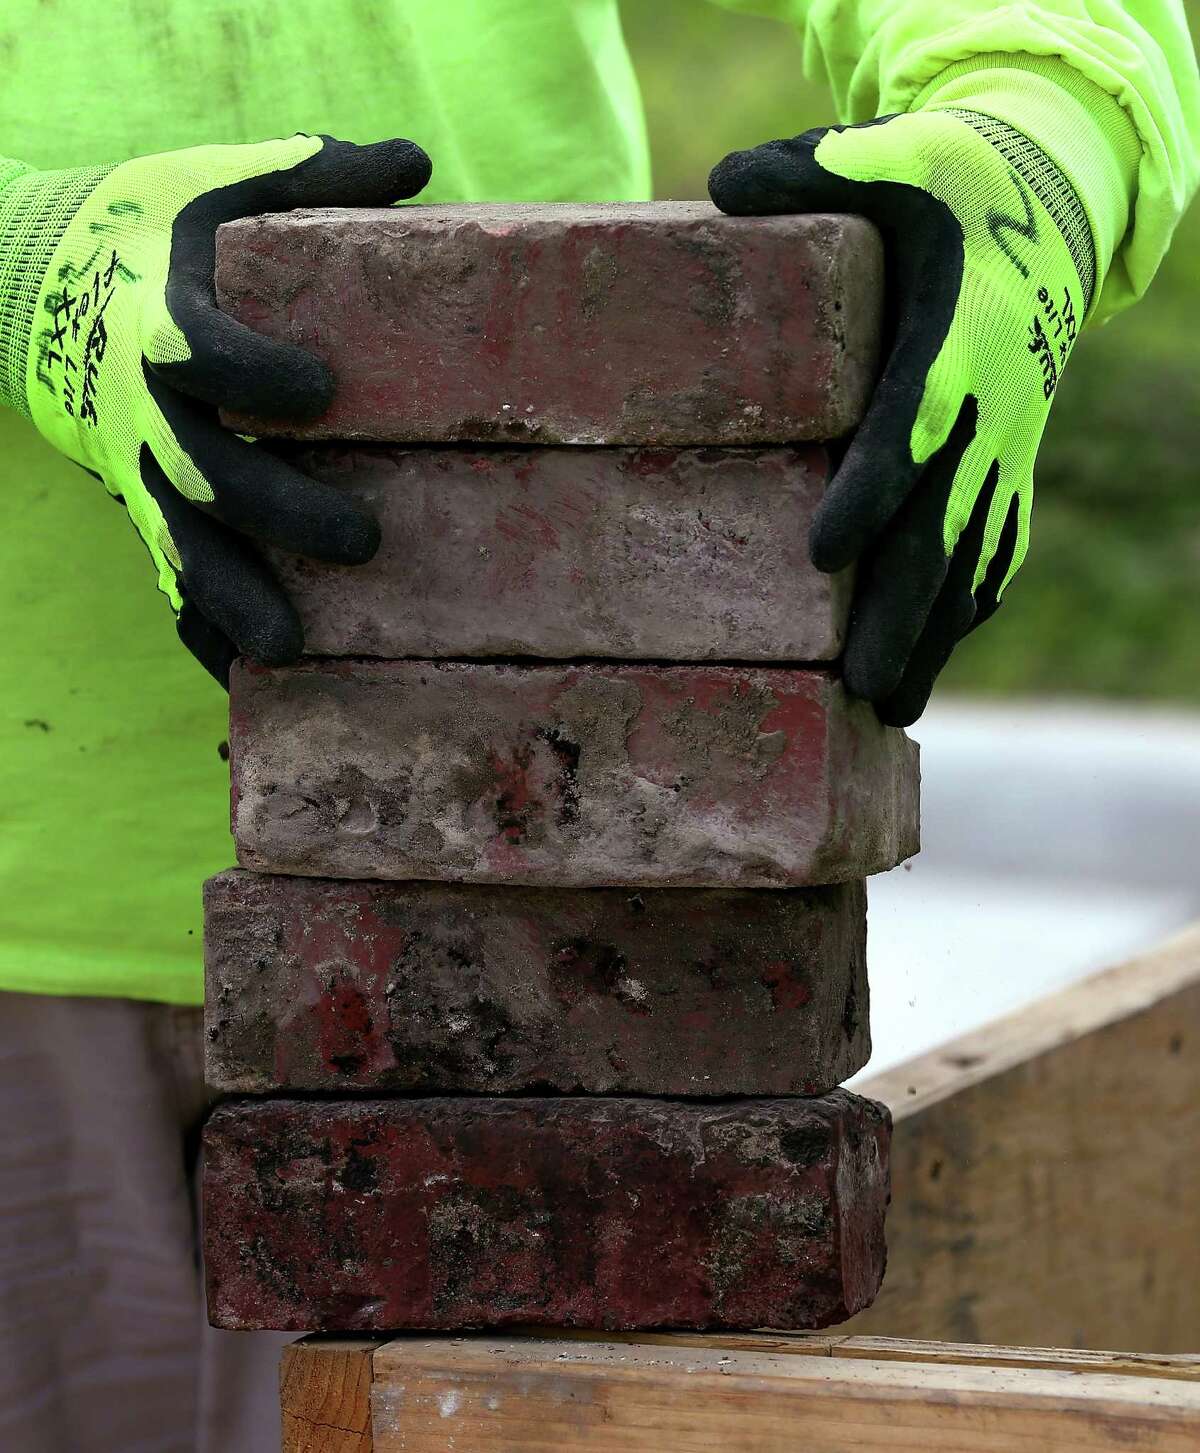 Houston Public Works crews re-install the historic bricks on the corner of Andrews and Genesee streets in Freedman's Town Wednesday, Feb. 28, 2018, in Houston. ( Godofredo A. Vasquez / Houston Chronicle )